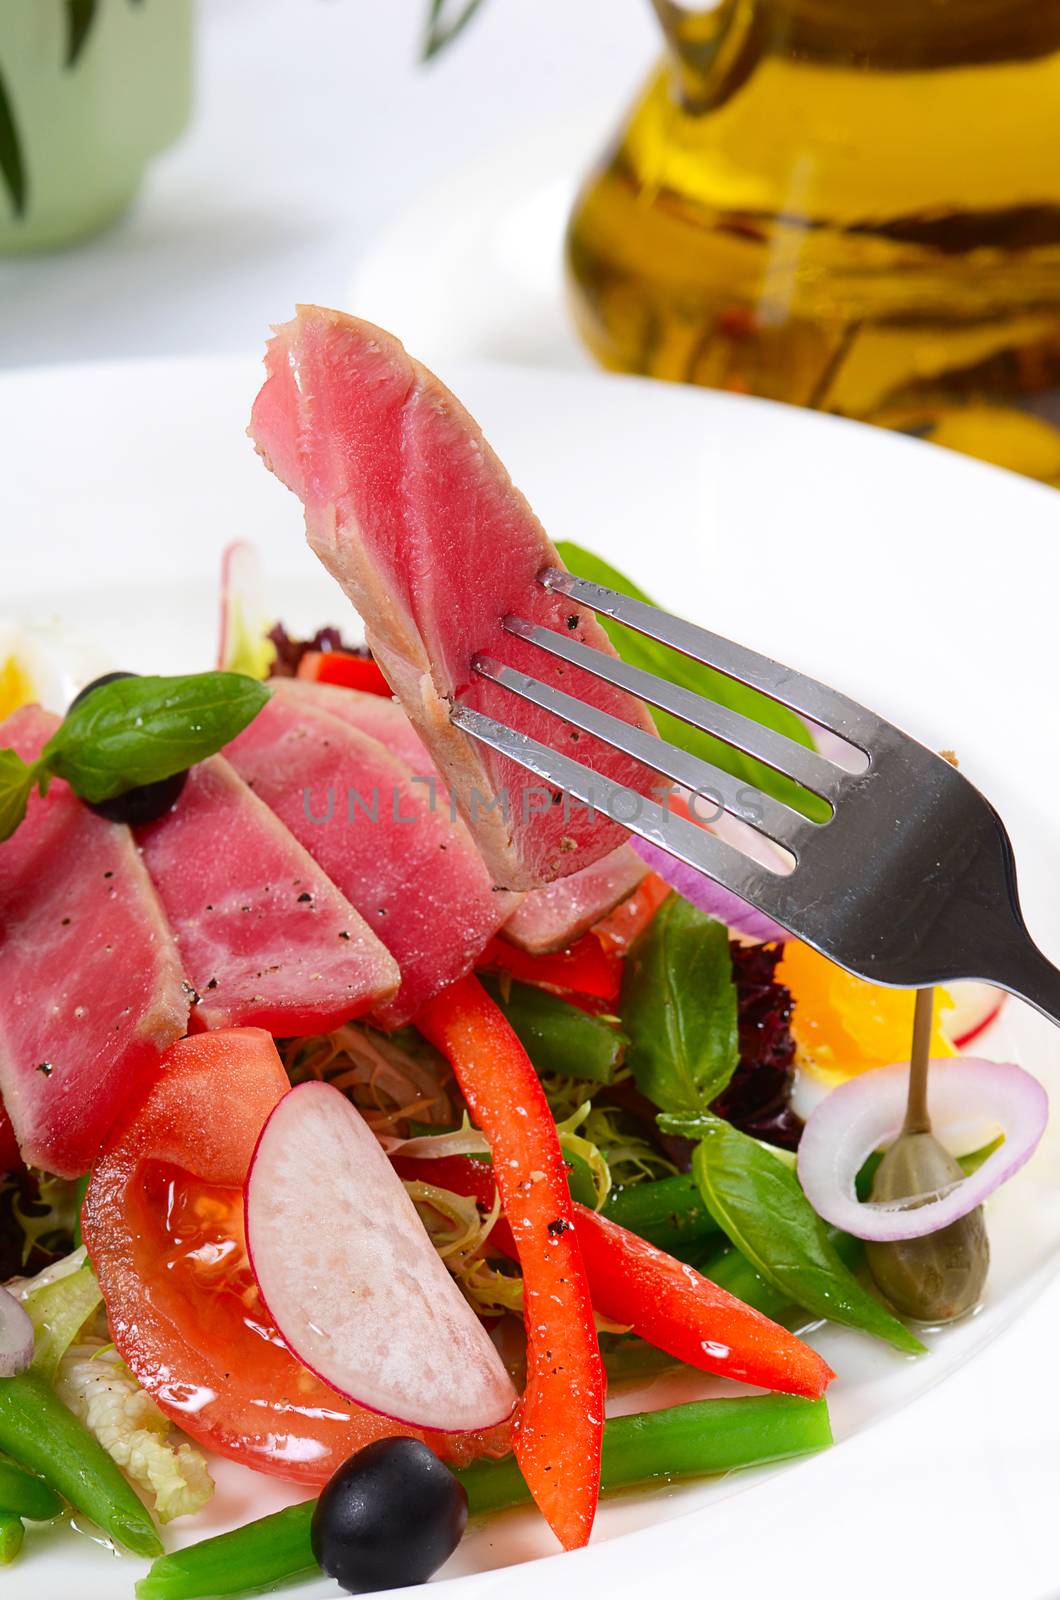 The nicoise with fresh tuna and vegetables